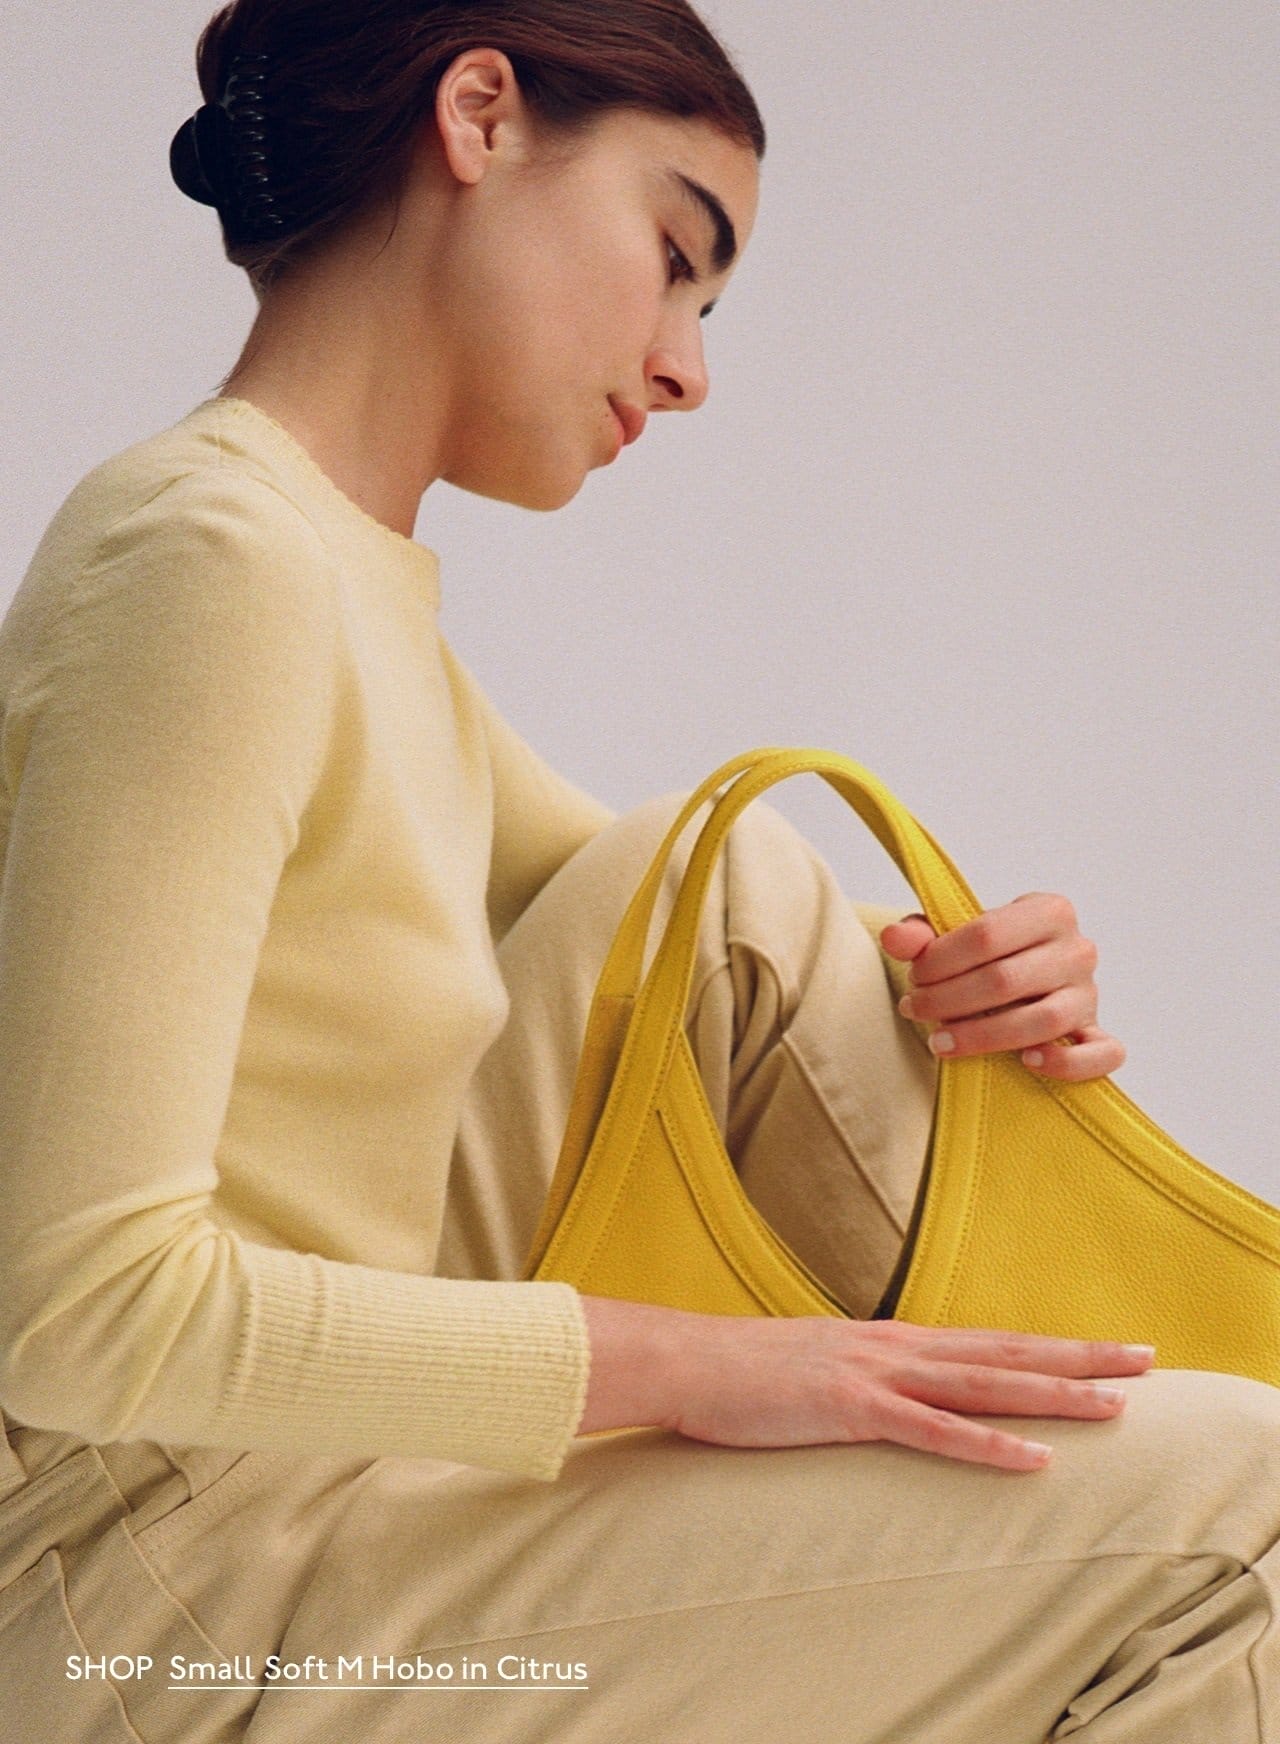 Shop the Small Soft M Hobo in Citrus.